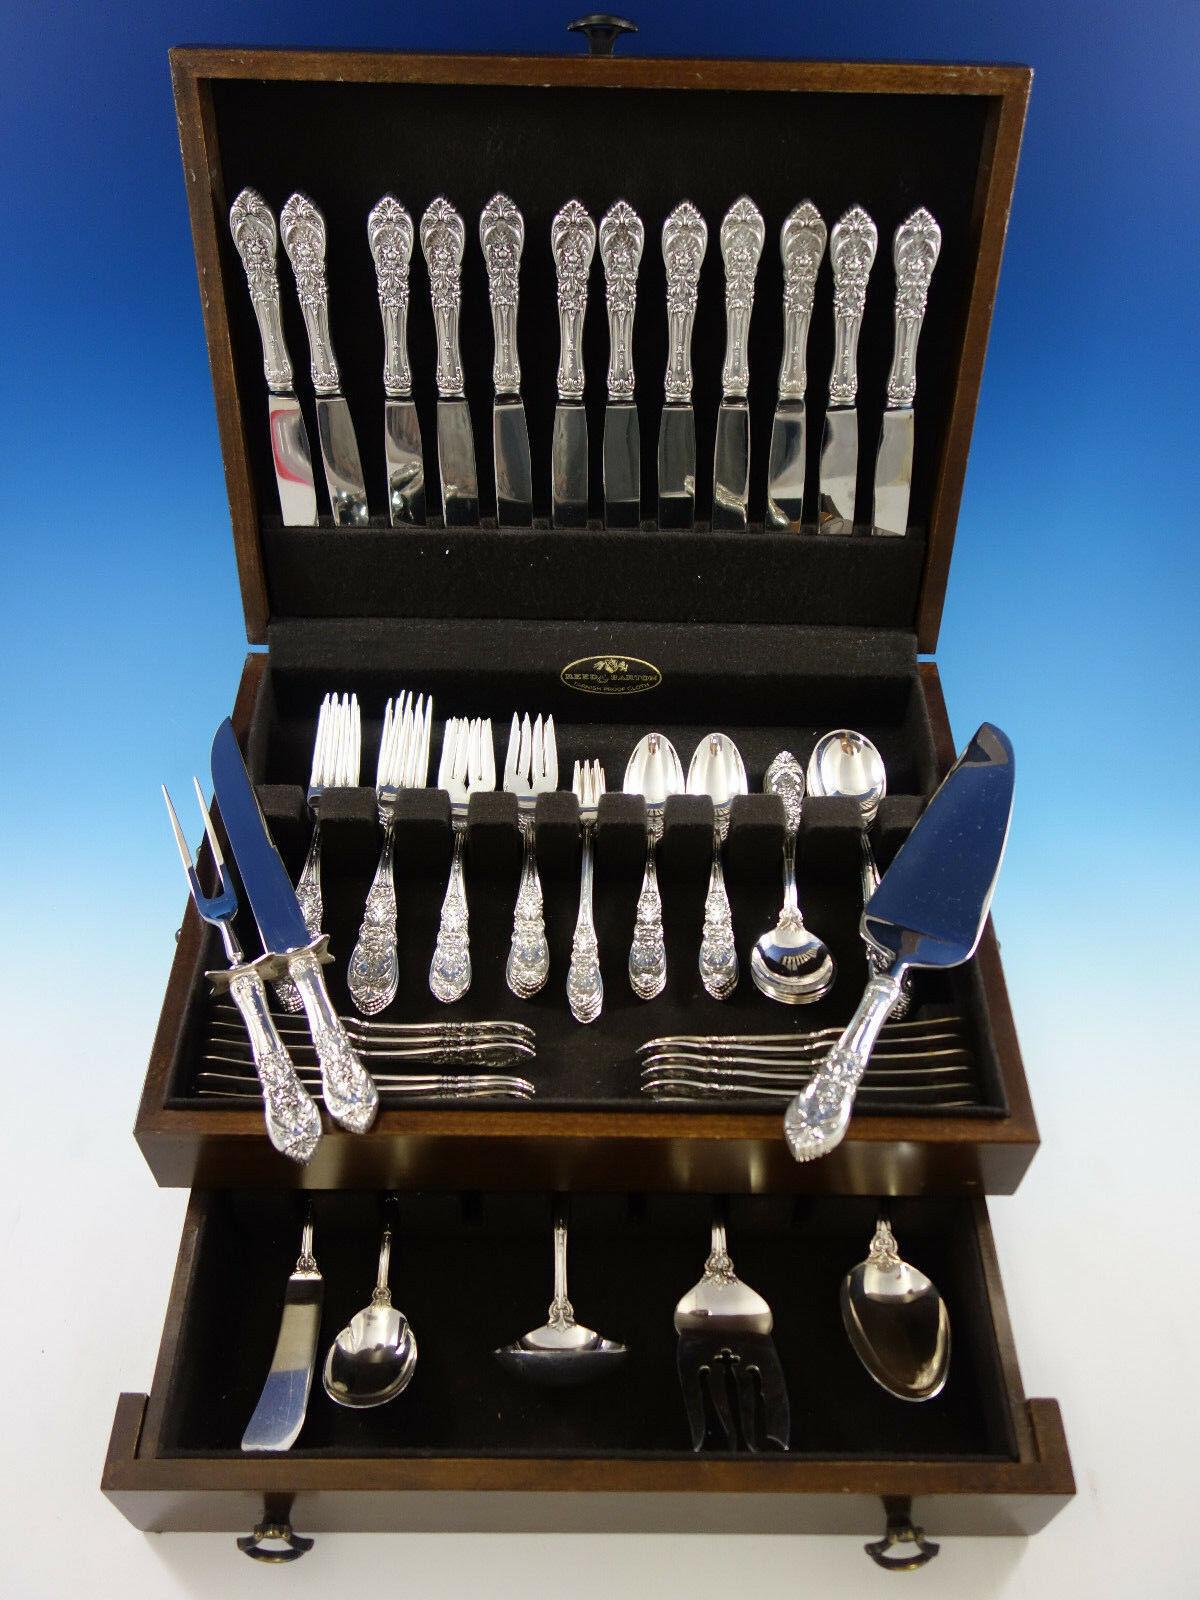 Gorgeous Richelieu by International sterling silver flatware set - 92 pieces. This set includes:

12 knives, 9